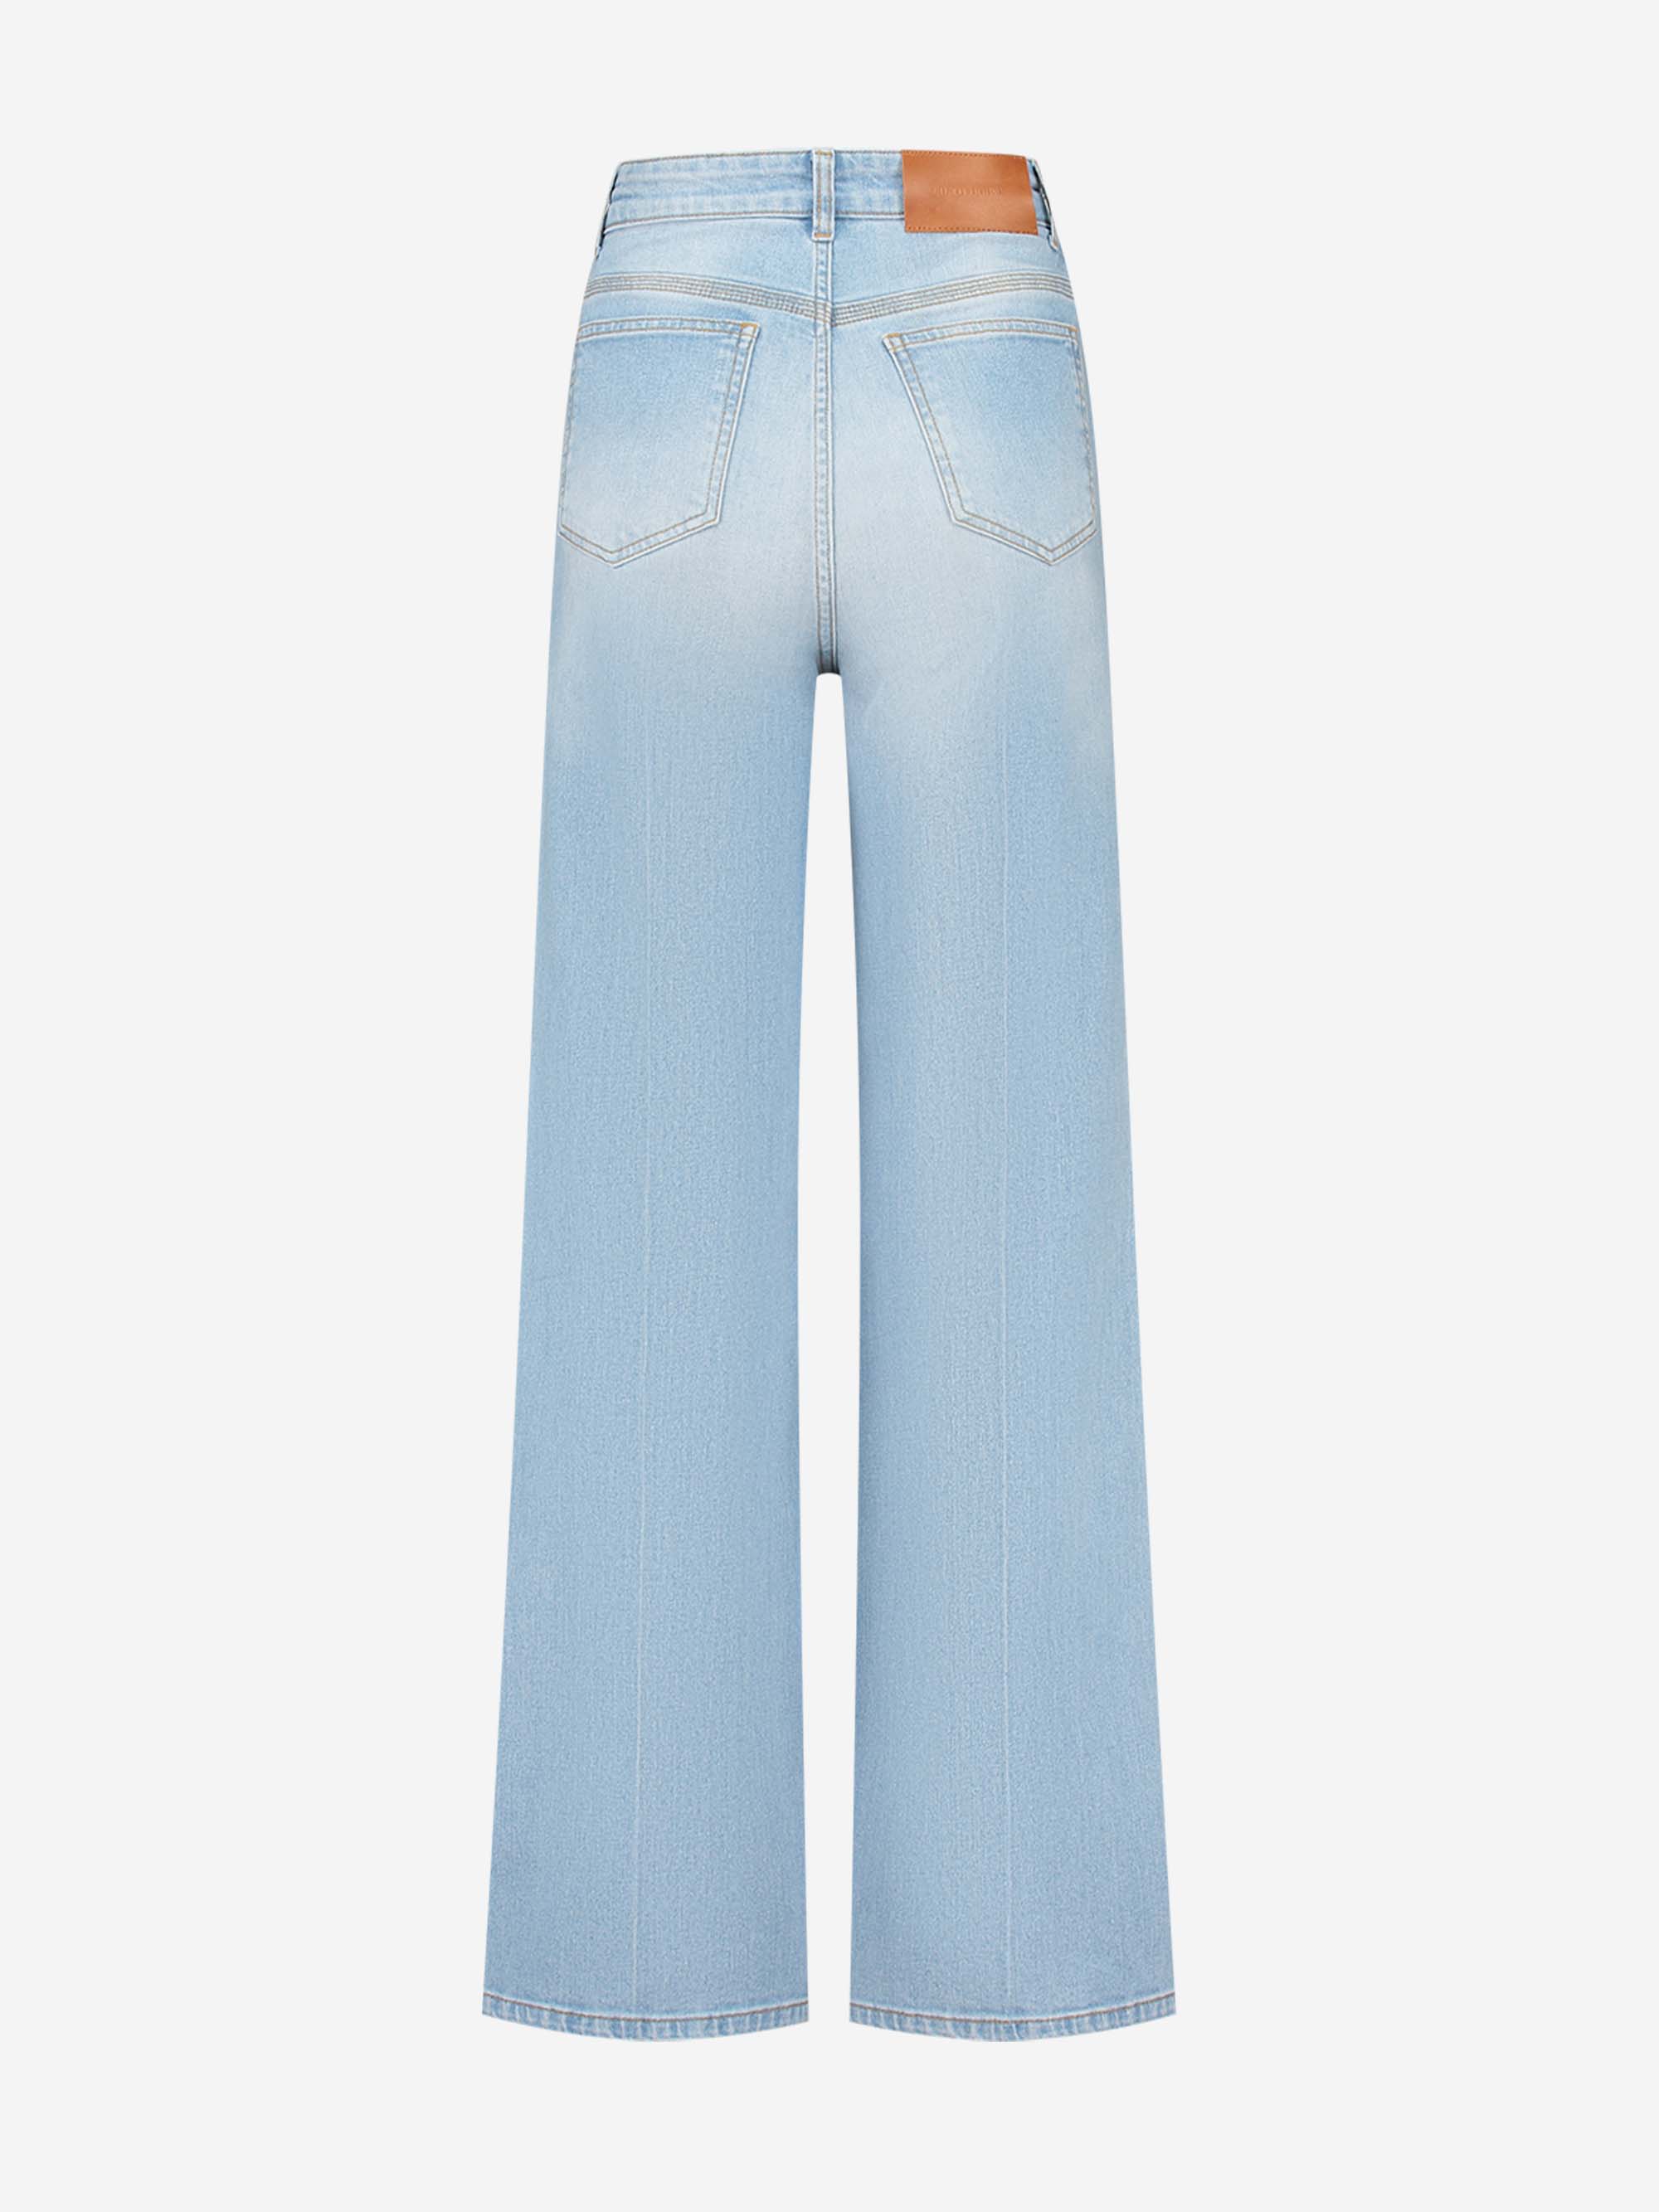 Denim Wide Leg Jeans with high rise